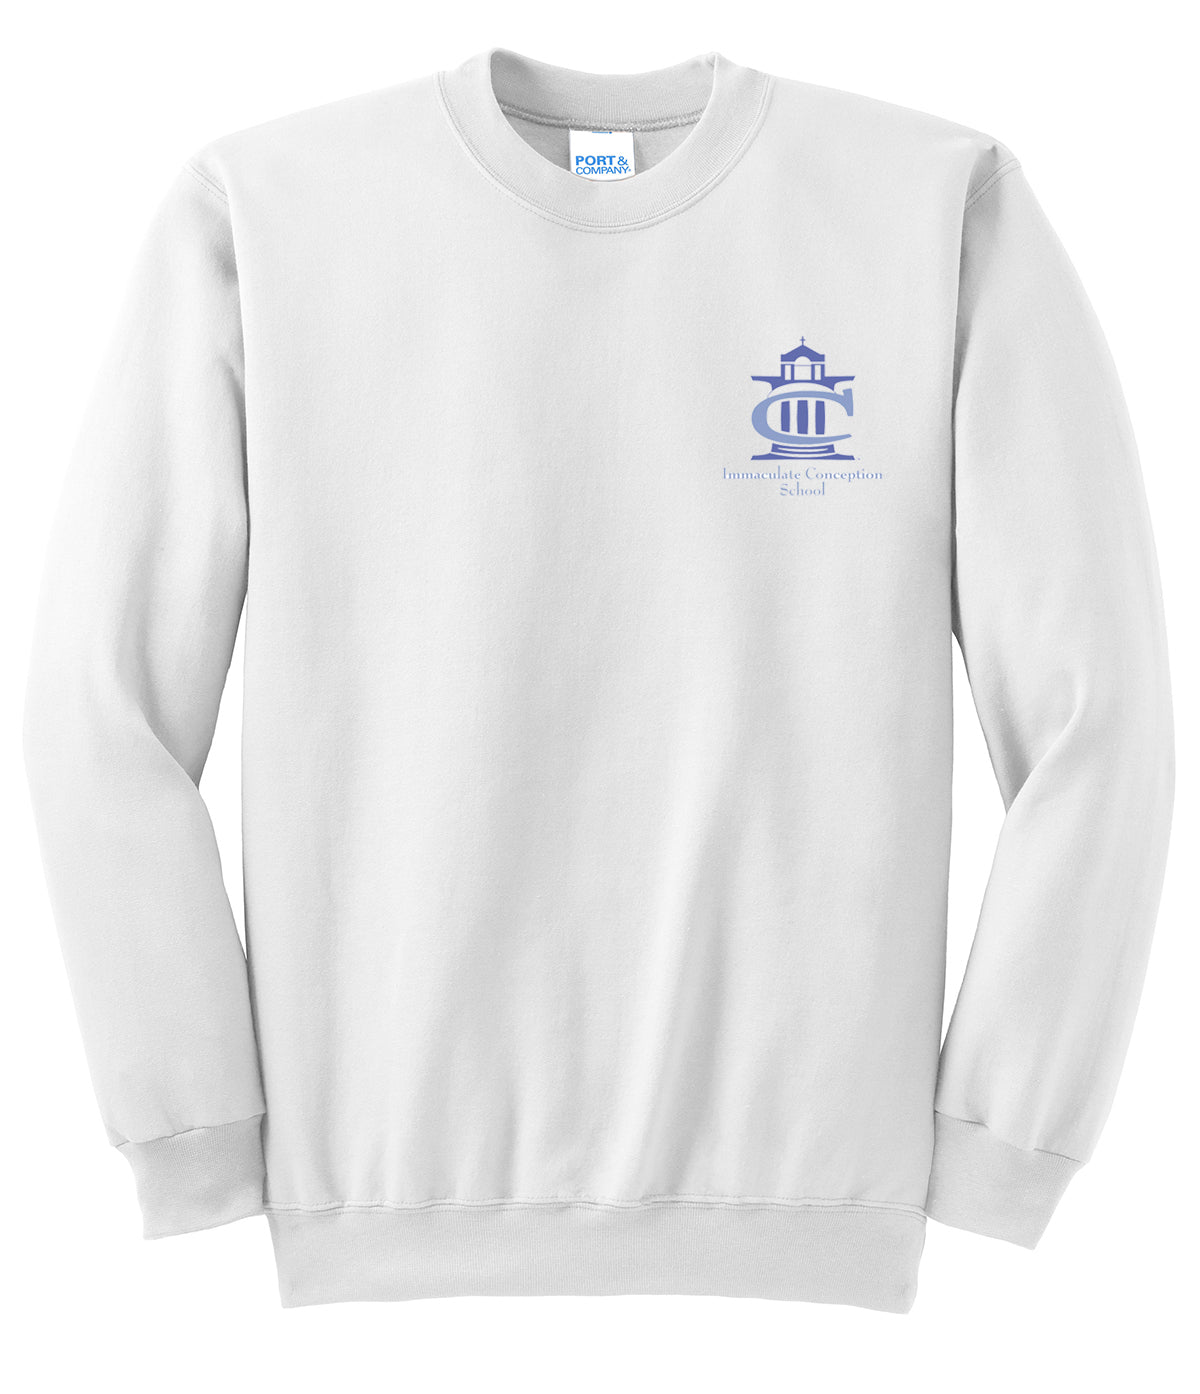 Adult Crewneck Sweatshirt With Immaculate Conception Fort Smith Logo